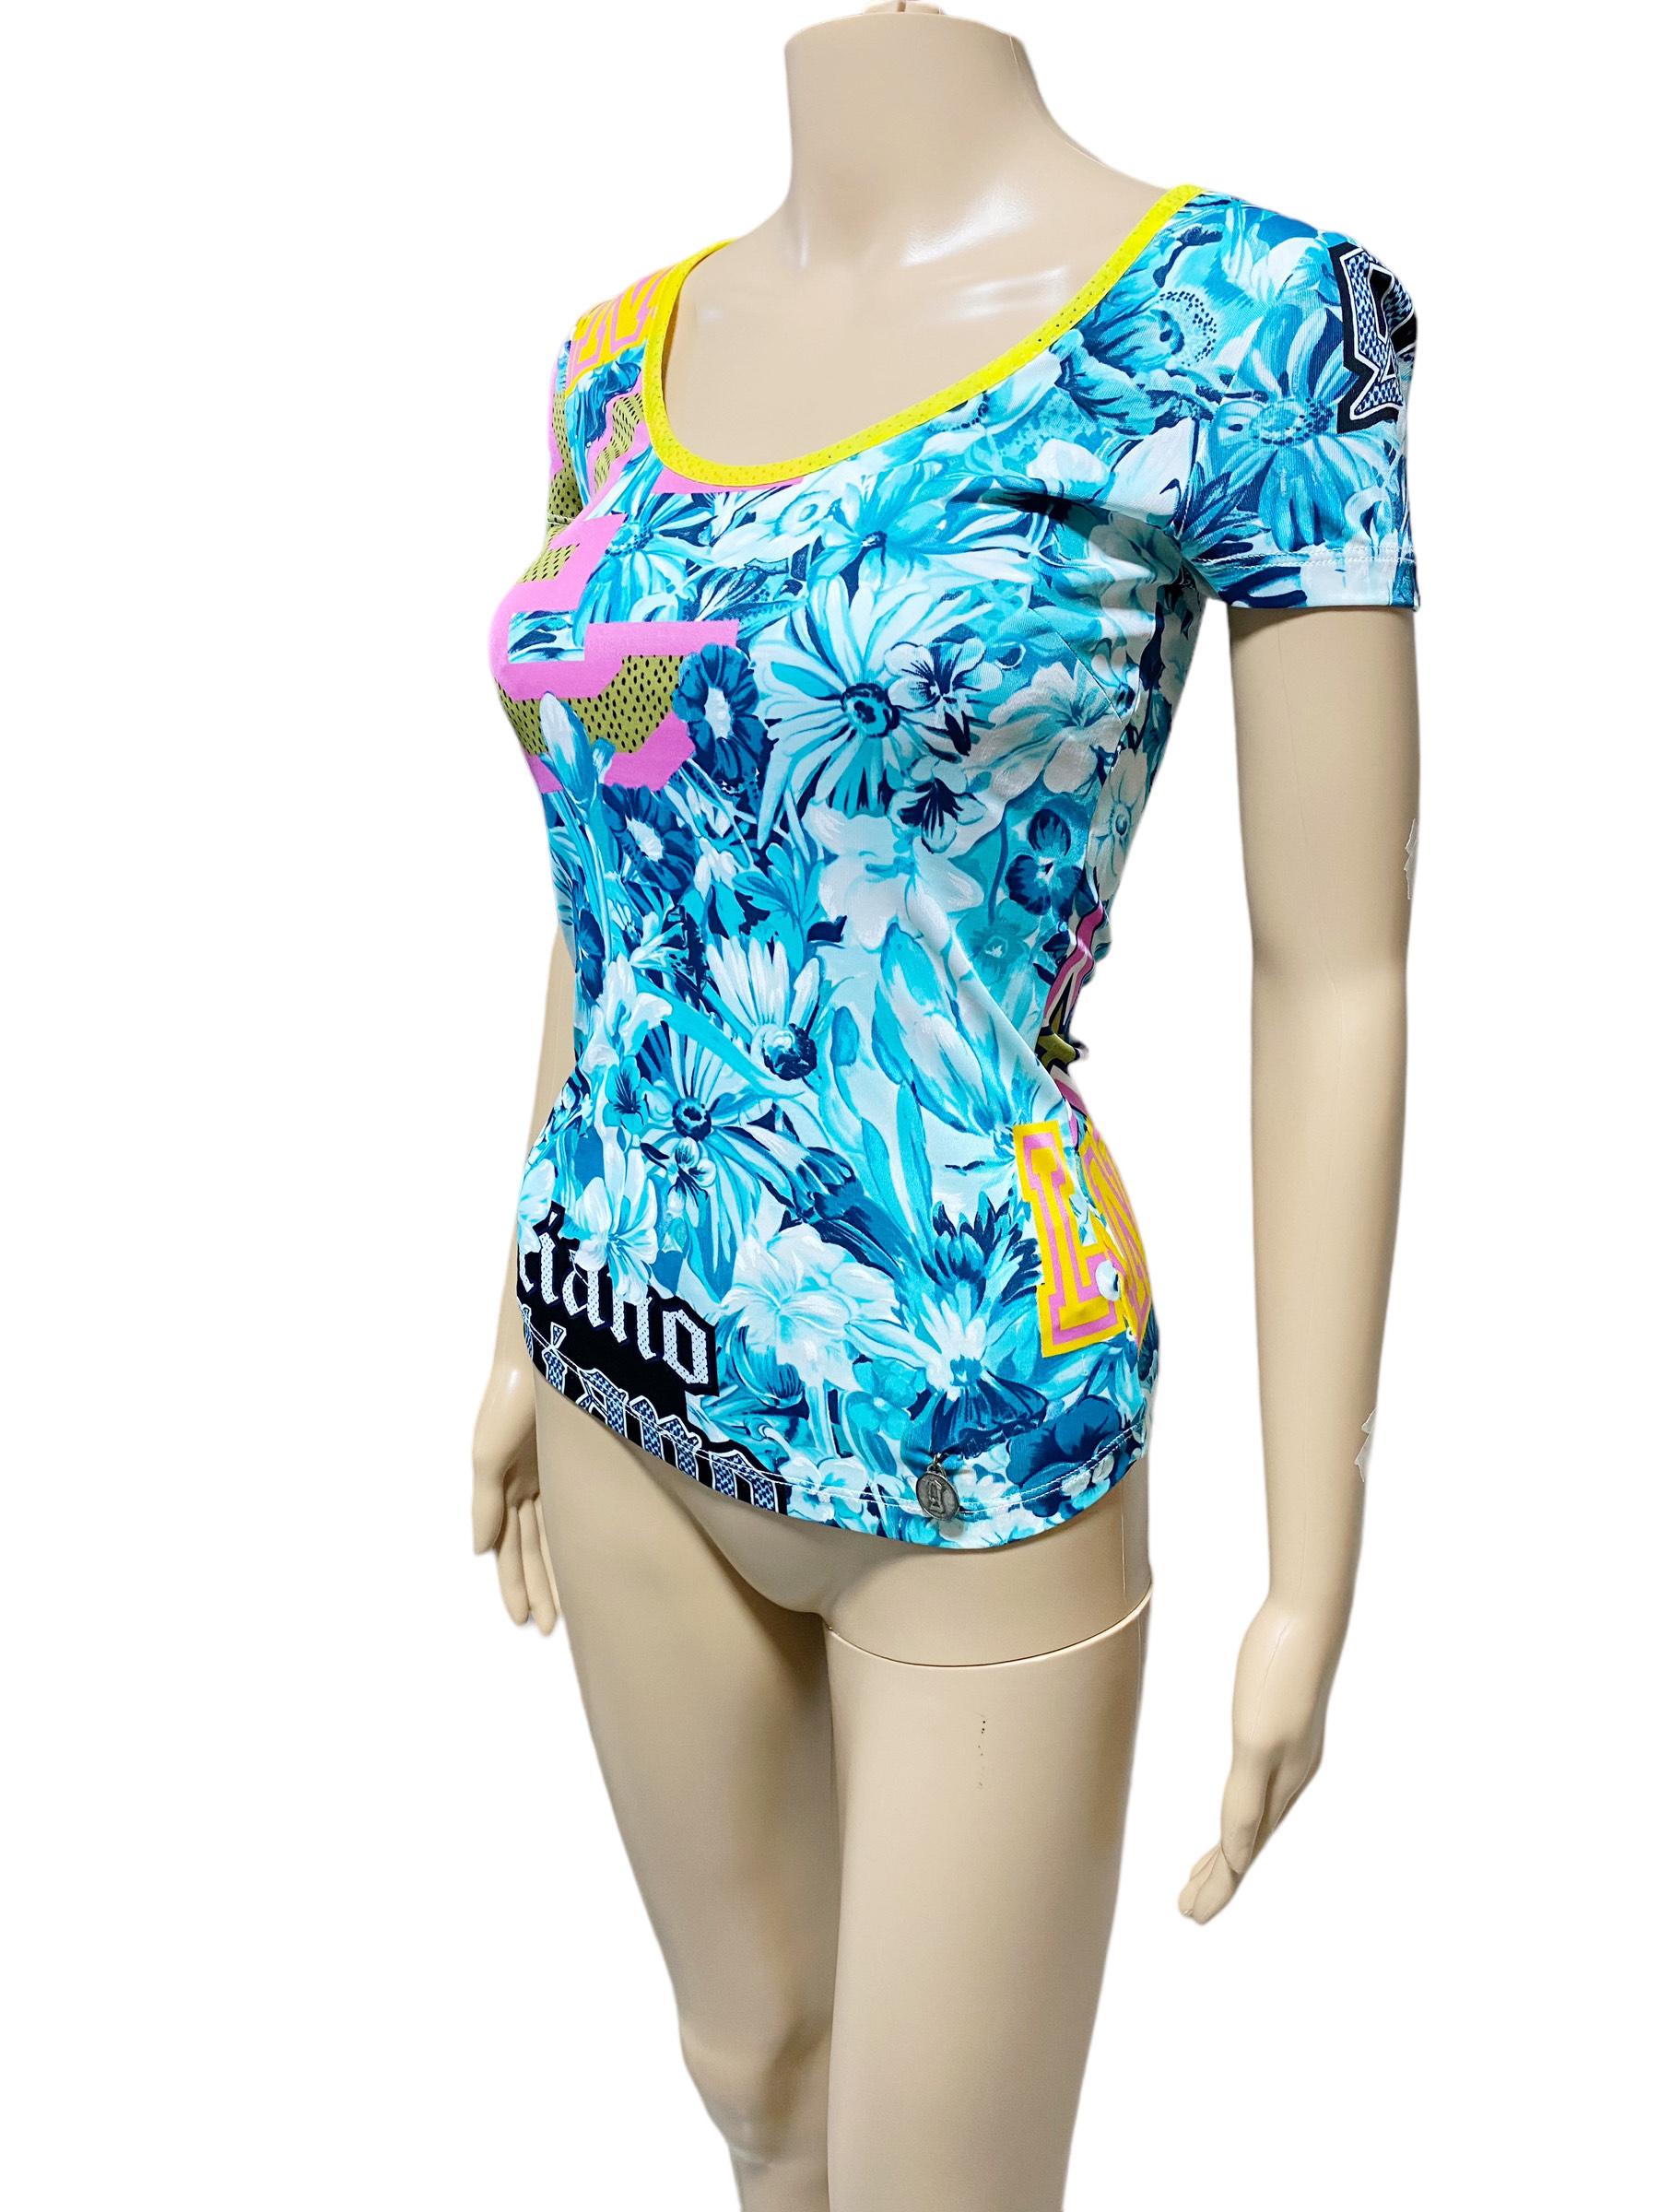 Vintage John Galliano athleisure style with floral print & the words Los Angeles, Galliano and football jersey style numbers on an aqua and turquoise floral print and brightly colored accents. 

Designer: John Galliano
Dimensions (Taken